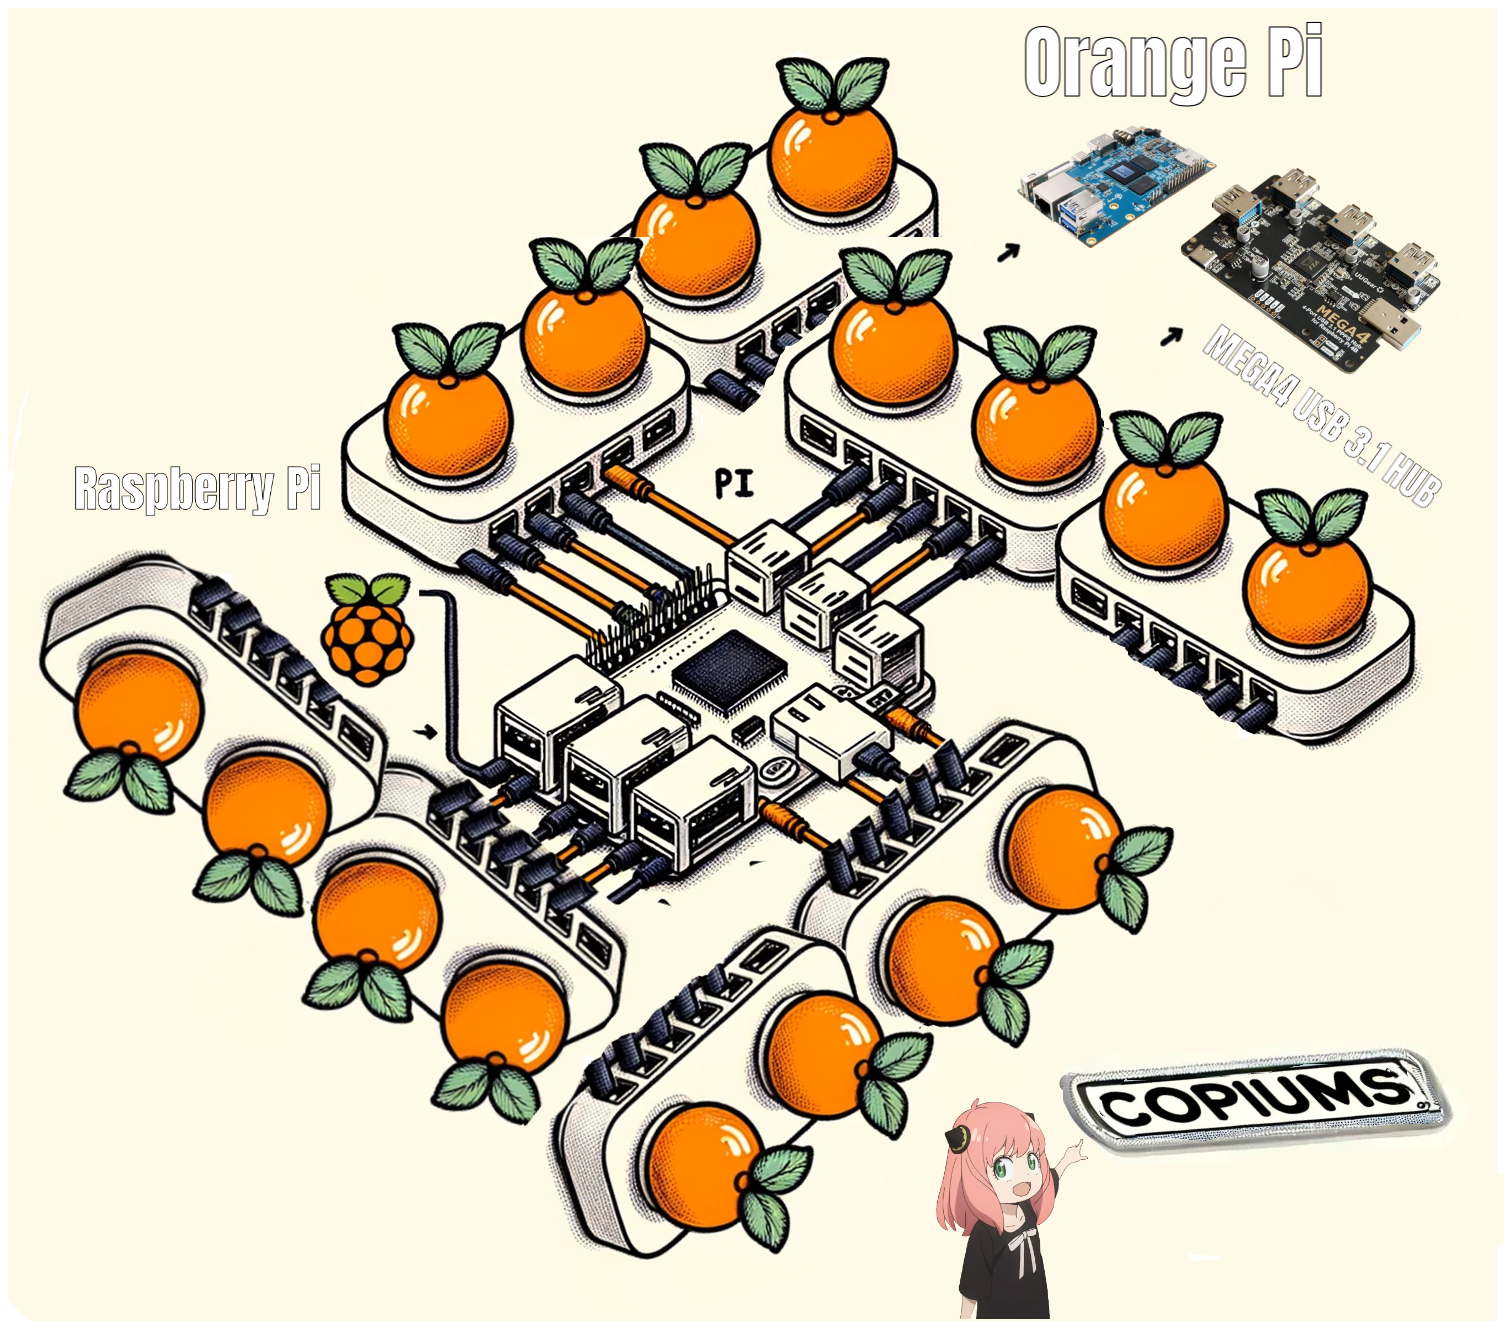 oranges are mostly for depiction purposes, to show you we'll put 4 Orange Pis per MEGA4 Hub, which is then connected to a single Raspberry Pi, which works up to 100 Orange Pis, and 25 MEGA4 Hubs, leading to 3.2TB of system RAM